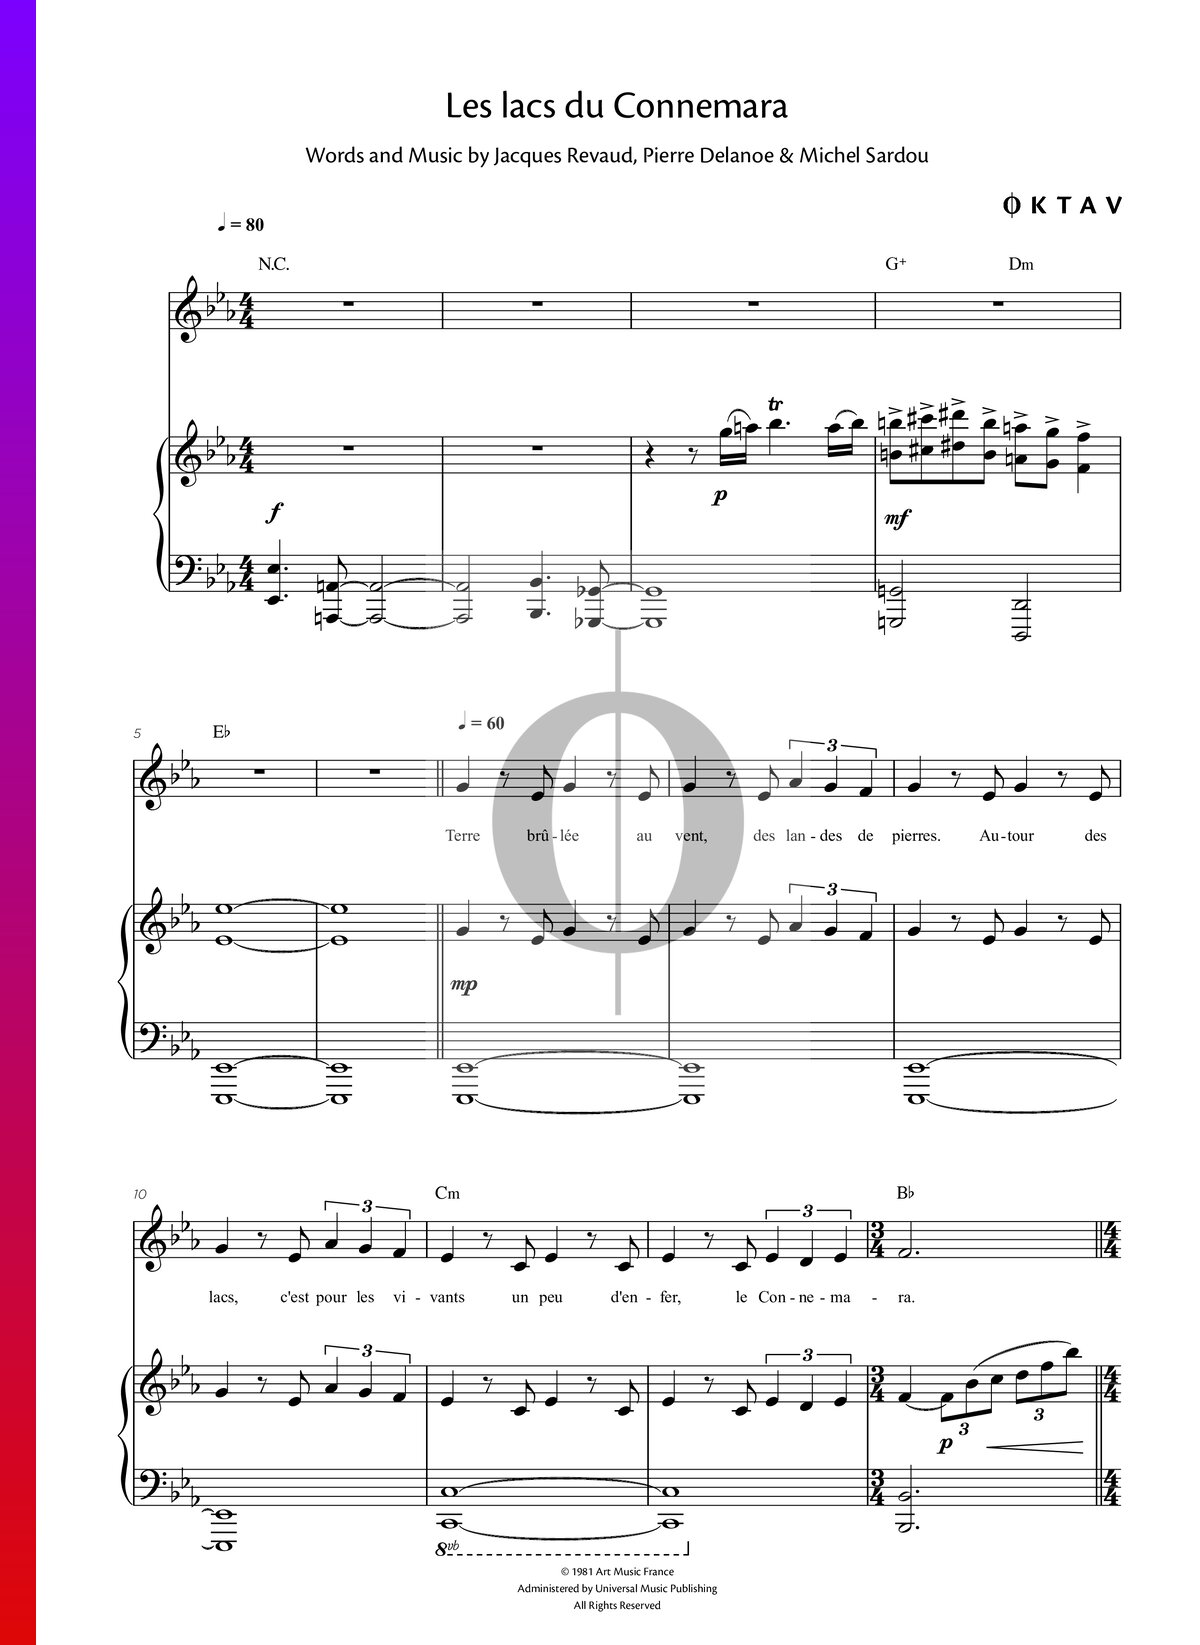 Sheet music Les lacs du Connemara for accordion to  download in PDF